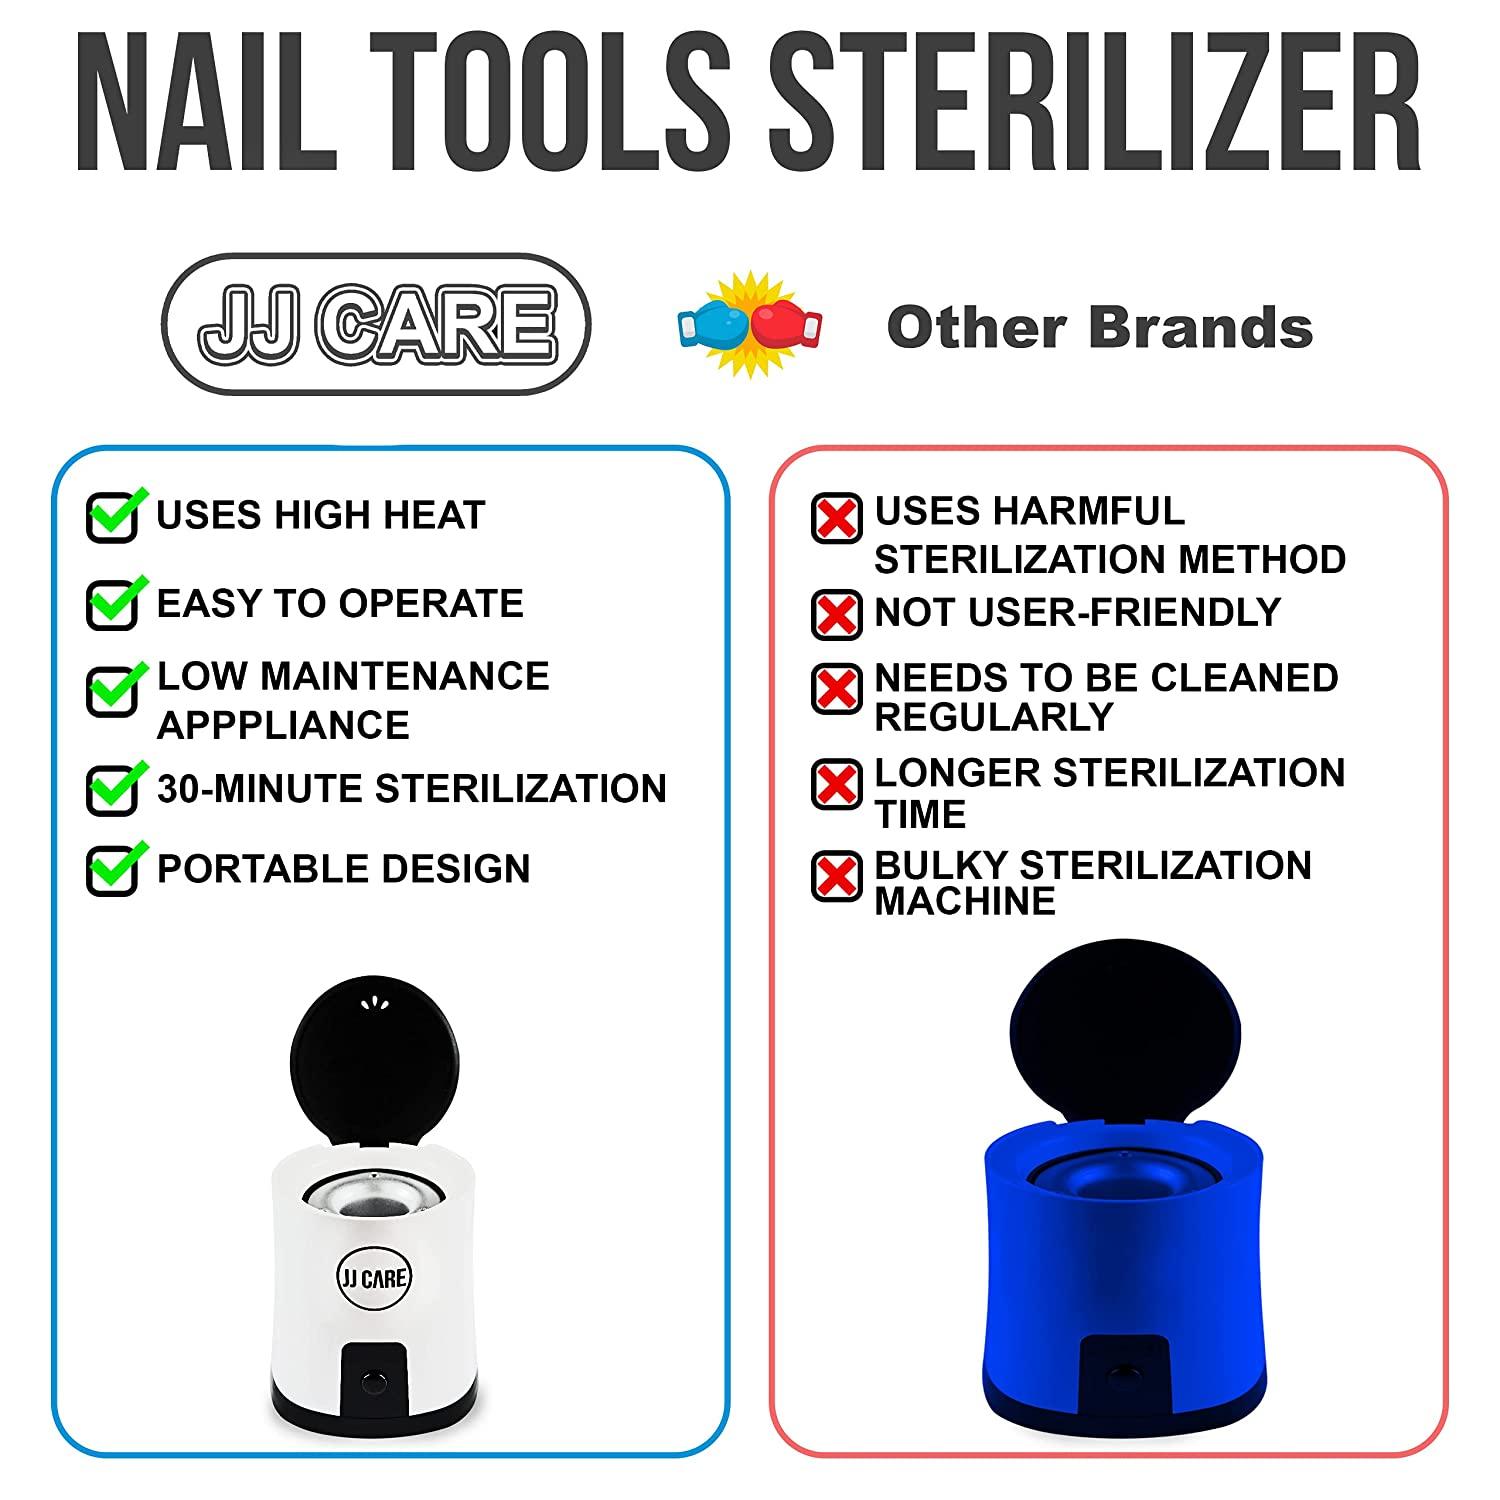 JJ CARE Nail Tool Sterilizer with Glass Beads - Manicure Tool